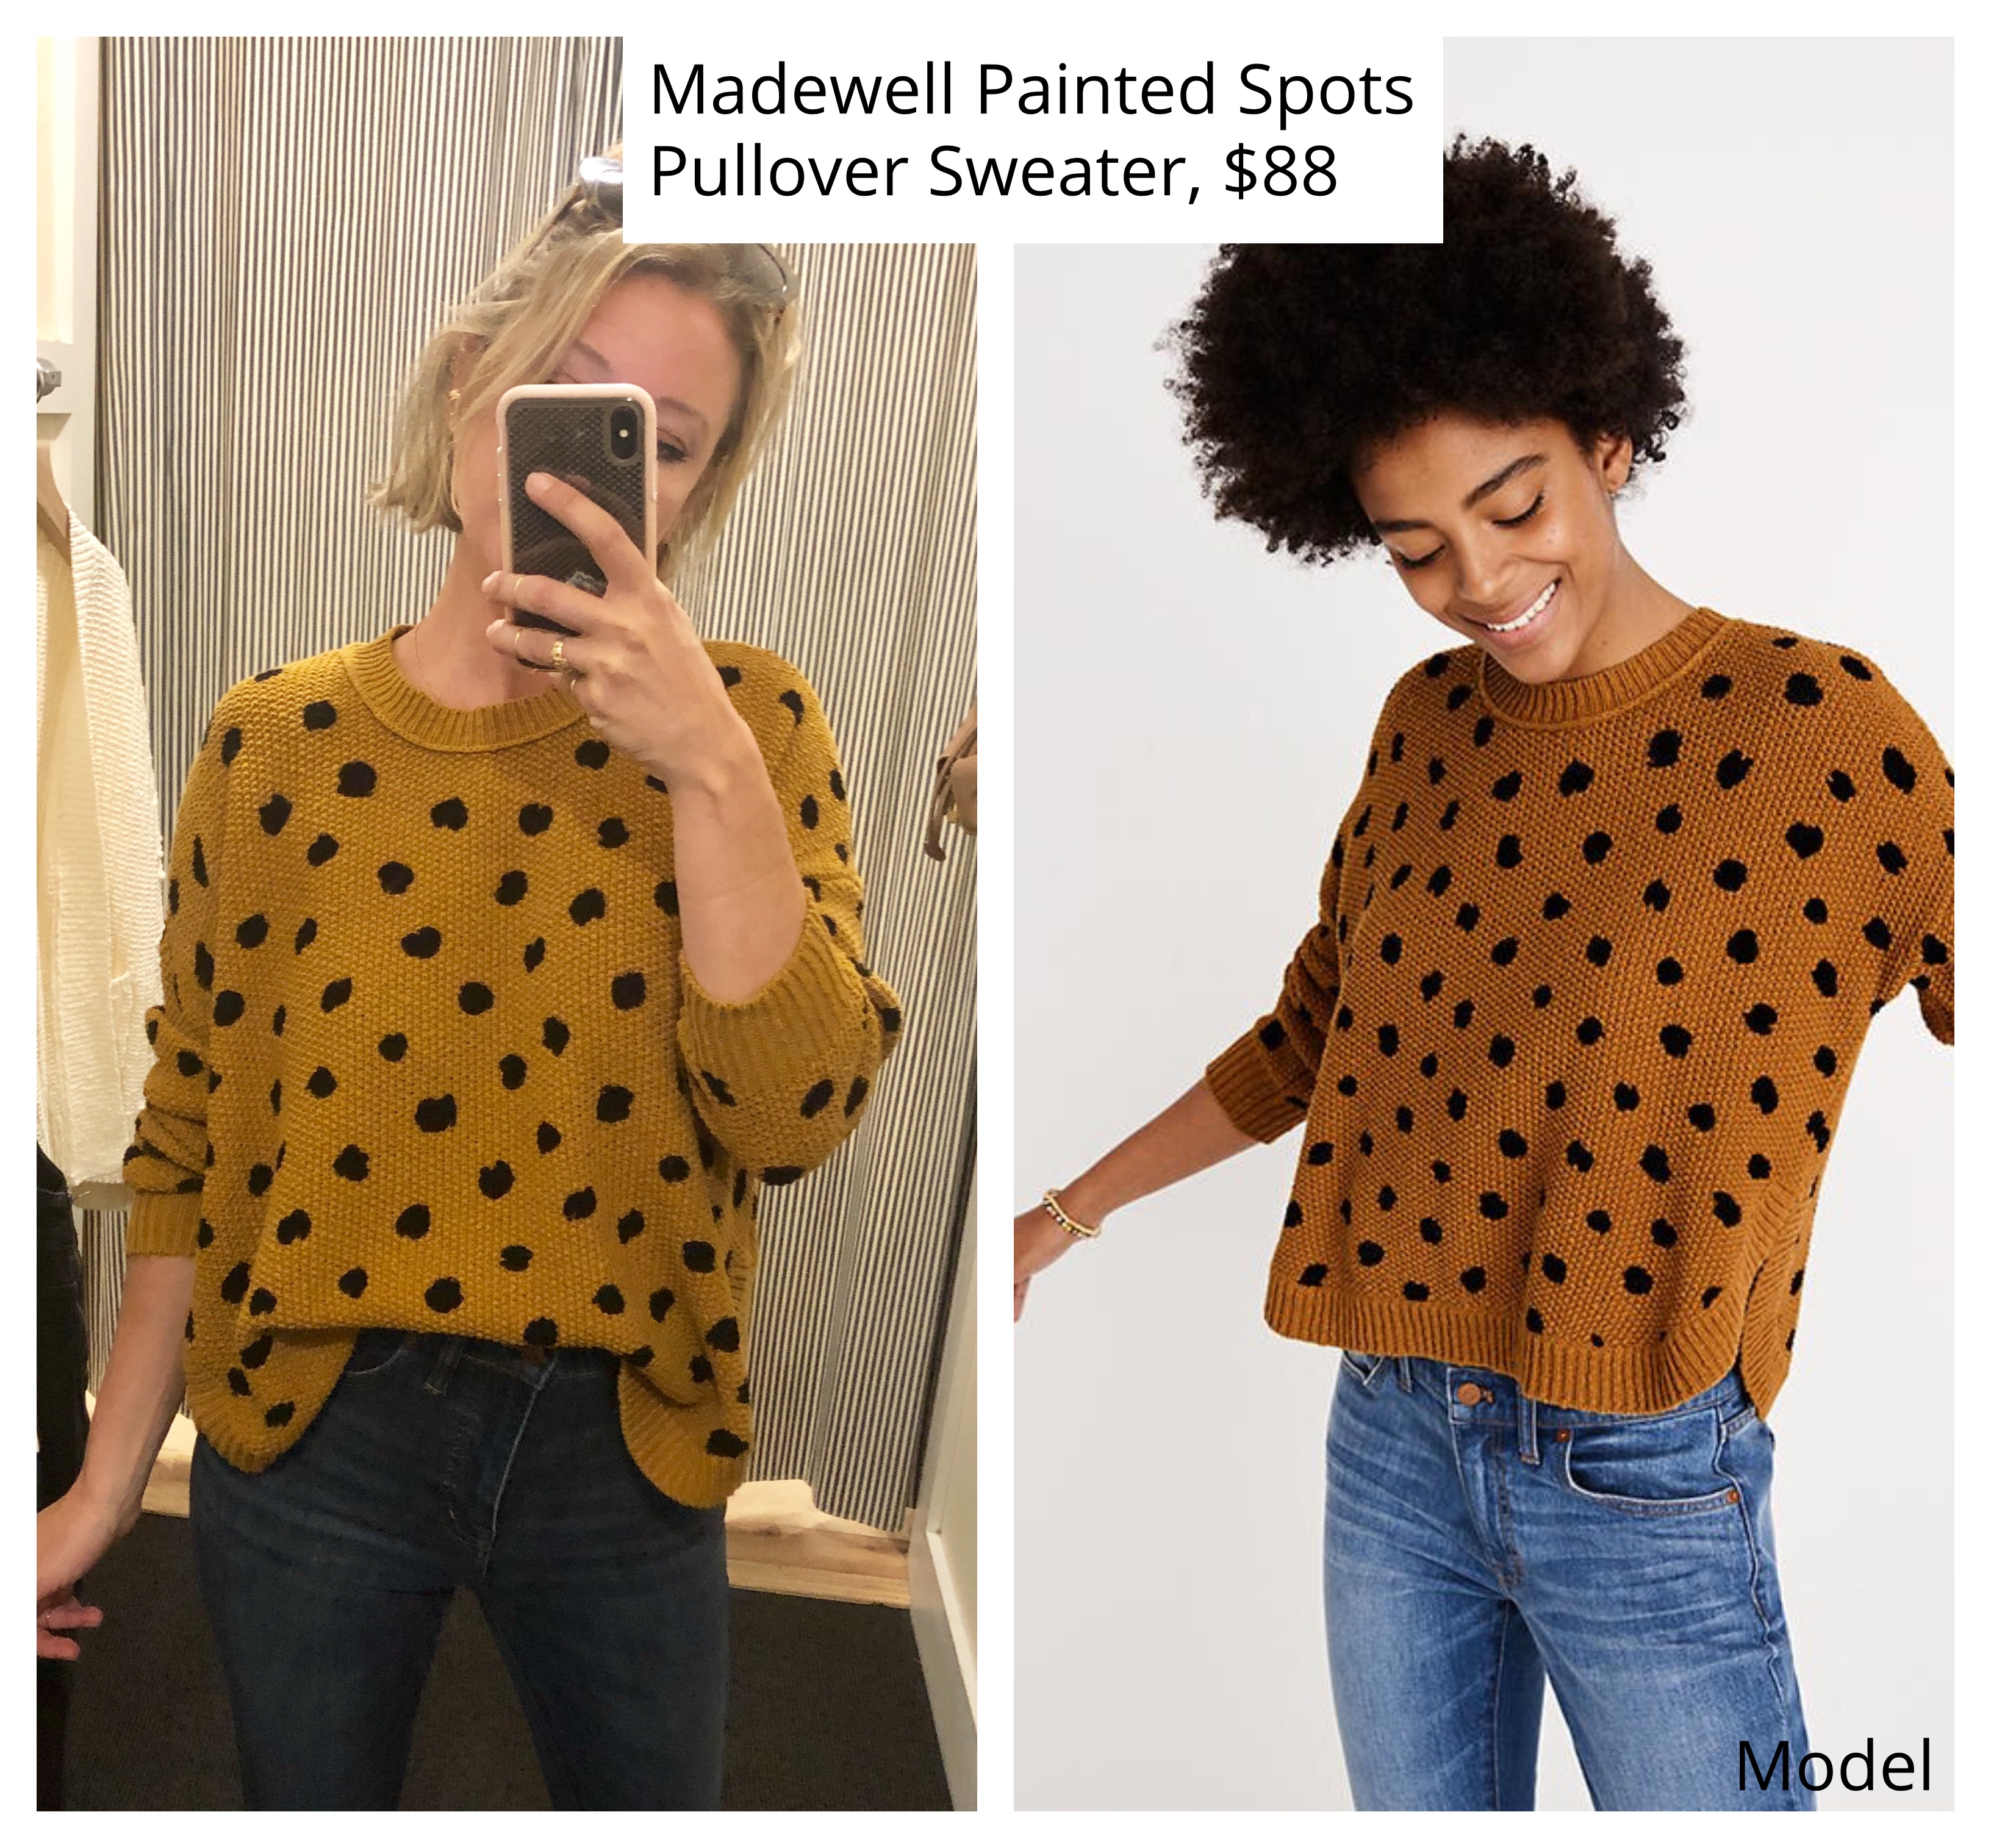 madewell painted spots pullover sweater